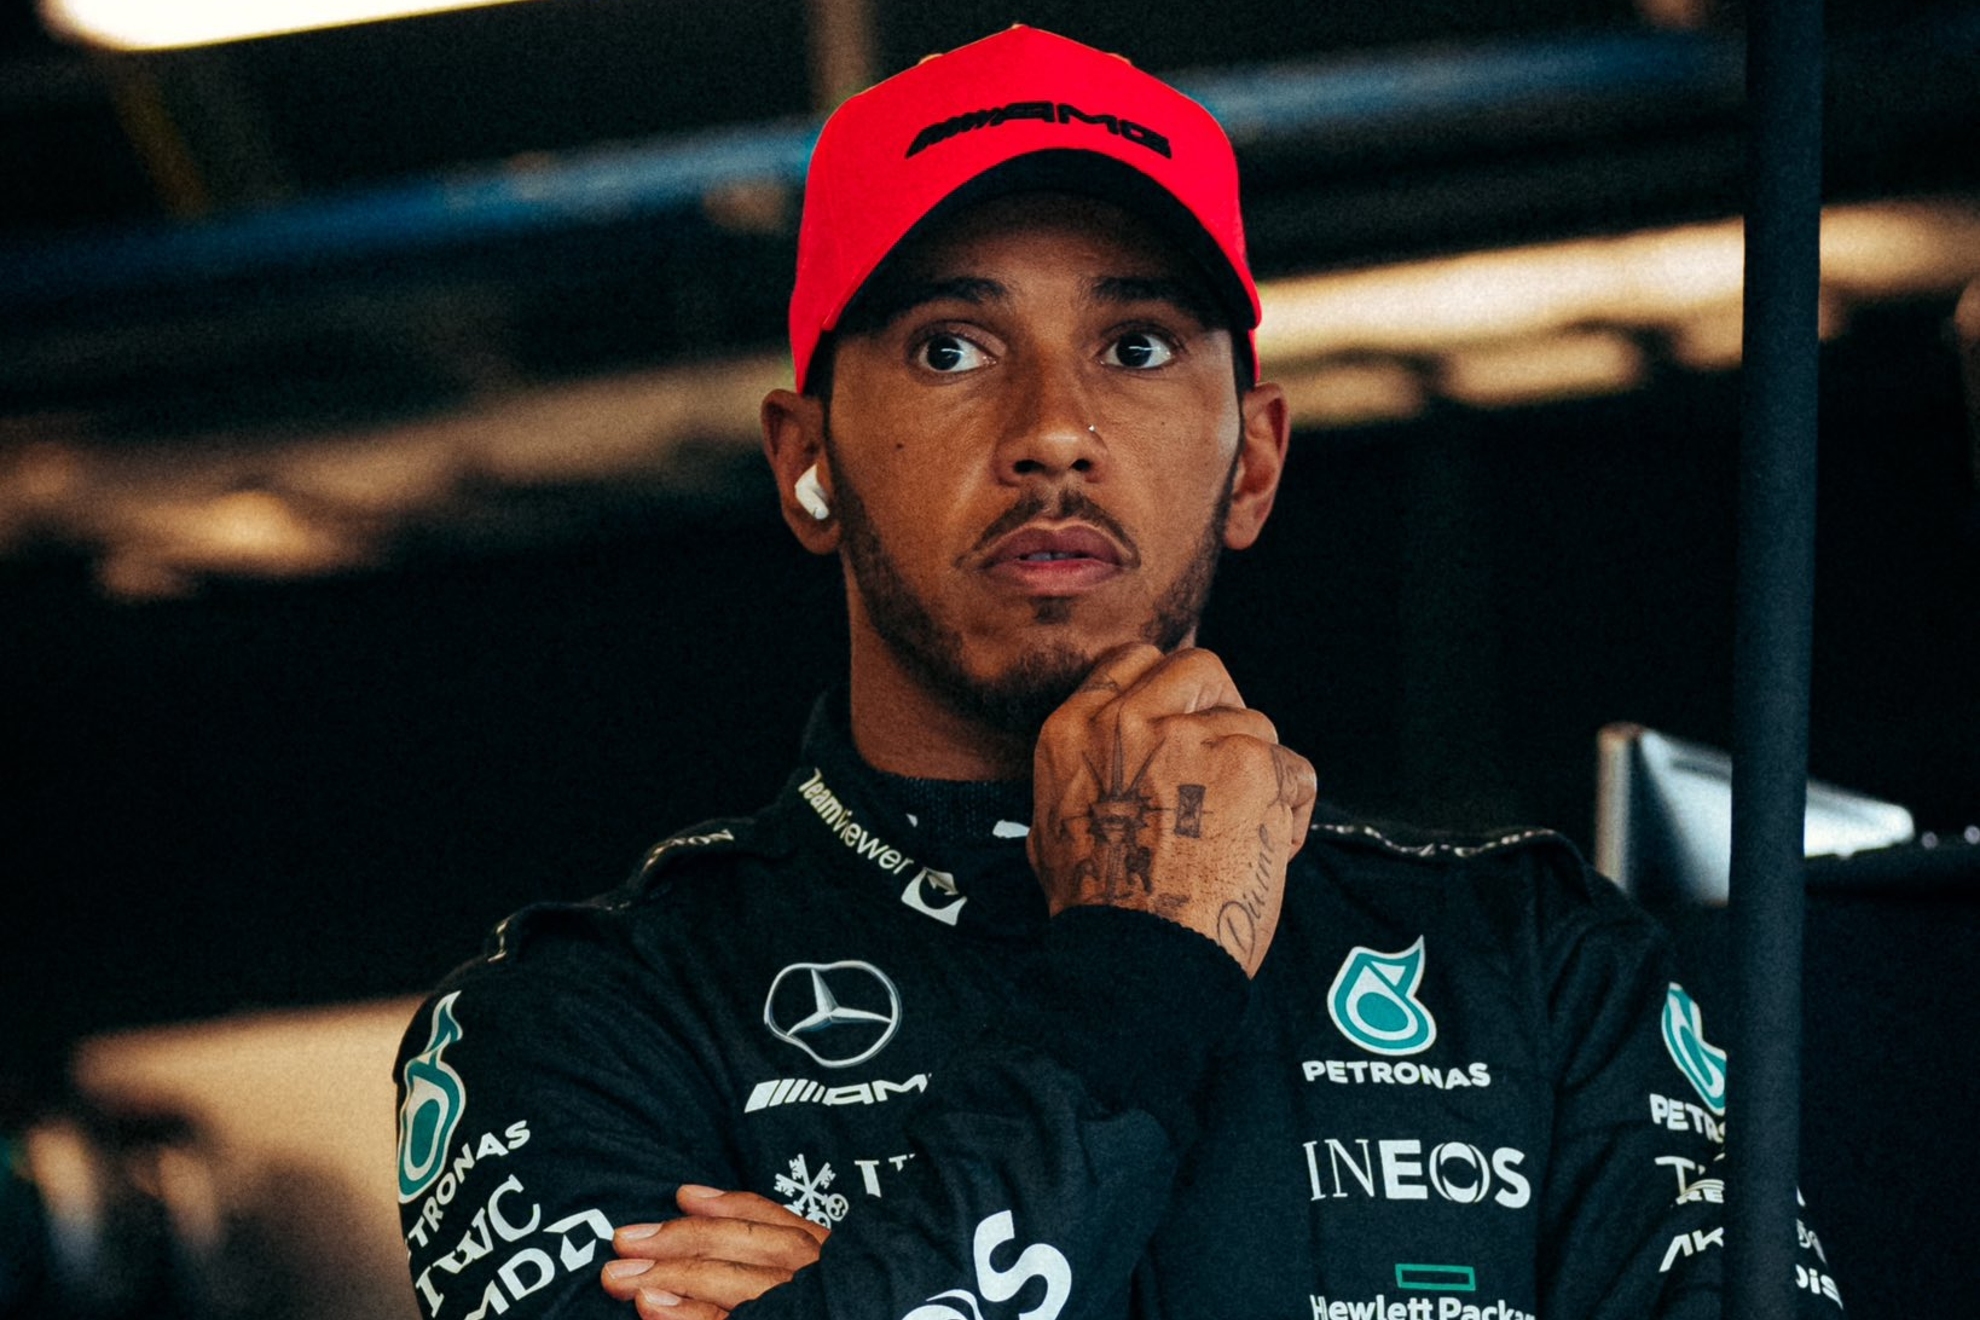 Lewis Hamilton wearing a black jacket and red cap